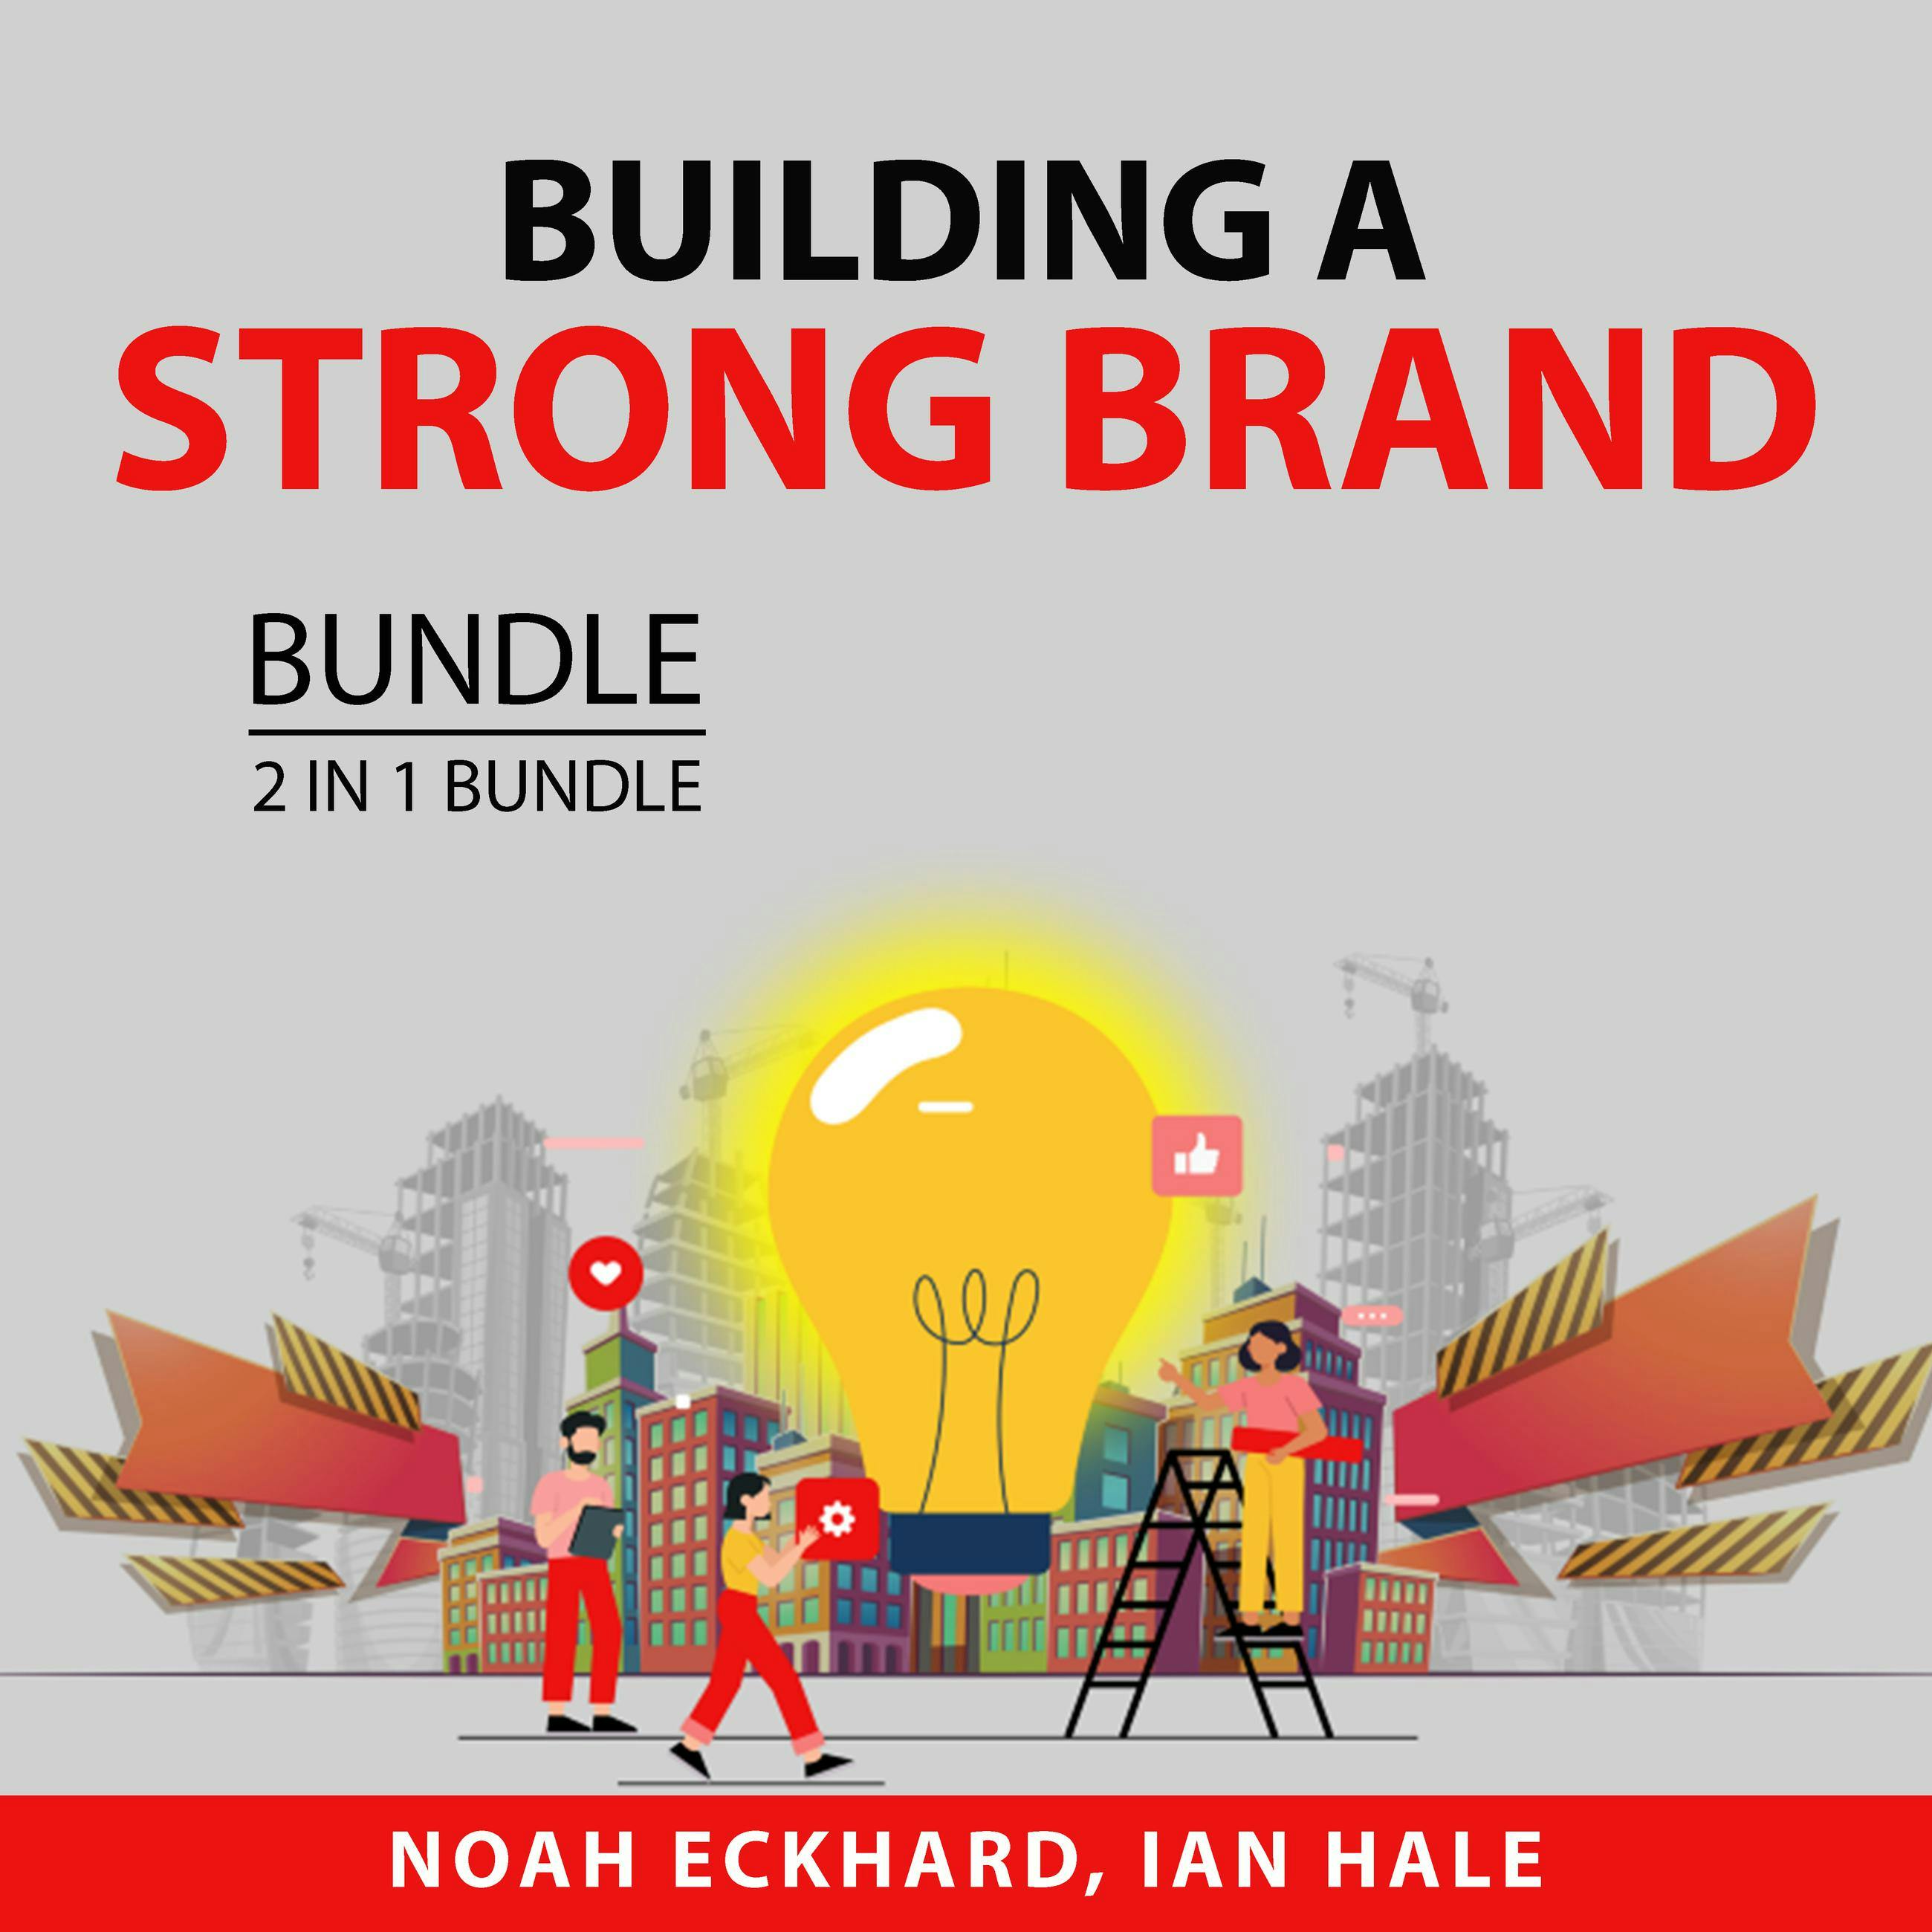 Building a Strong Brand Bundle, 2 in 1 Bundle: Expert Brand Marketing and Branding Power - undefined